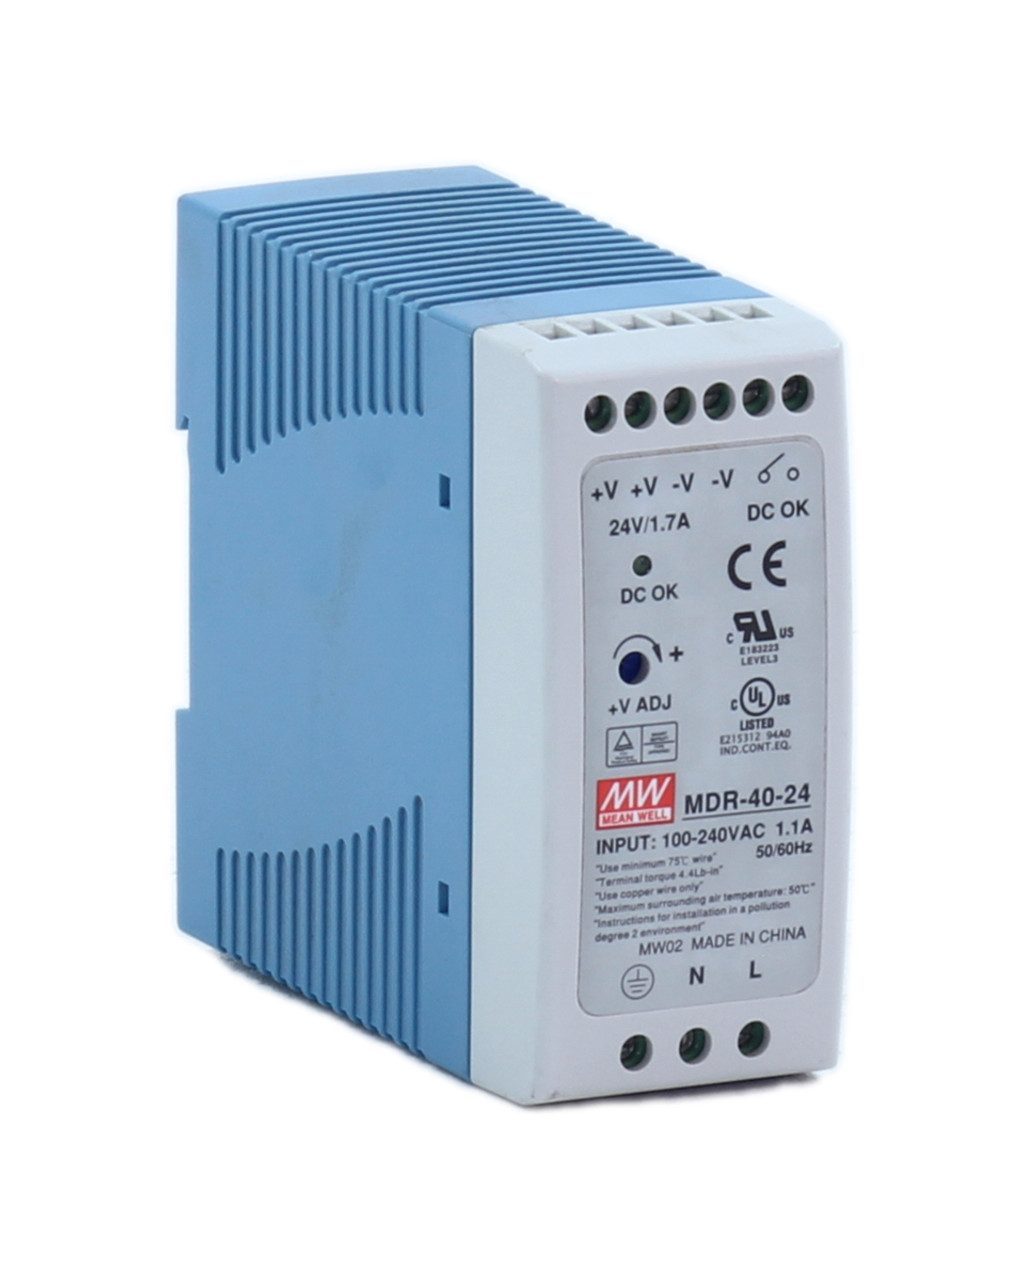 Mean Well MDR-40-24 Power Supplies 1.7A 24V Input: 85-264 Output: 24